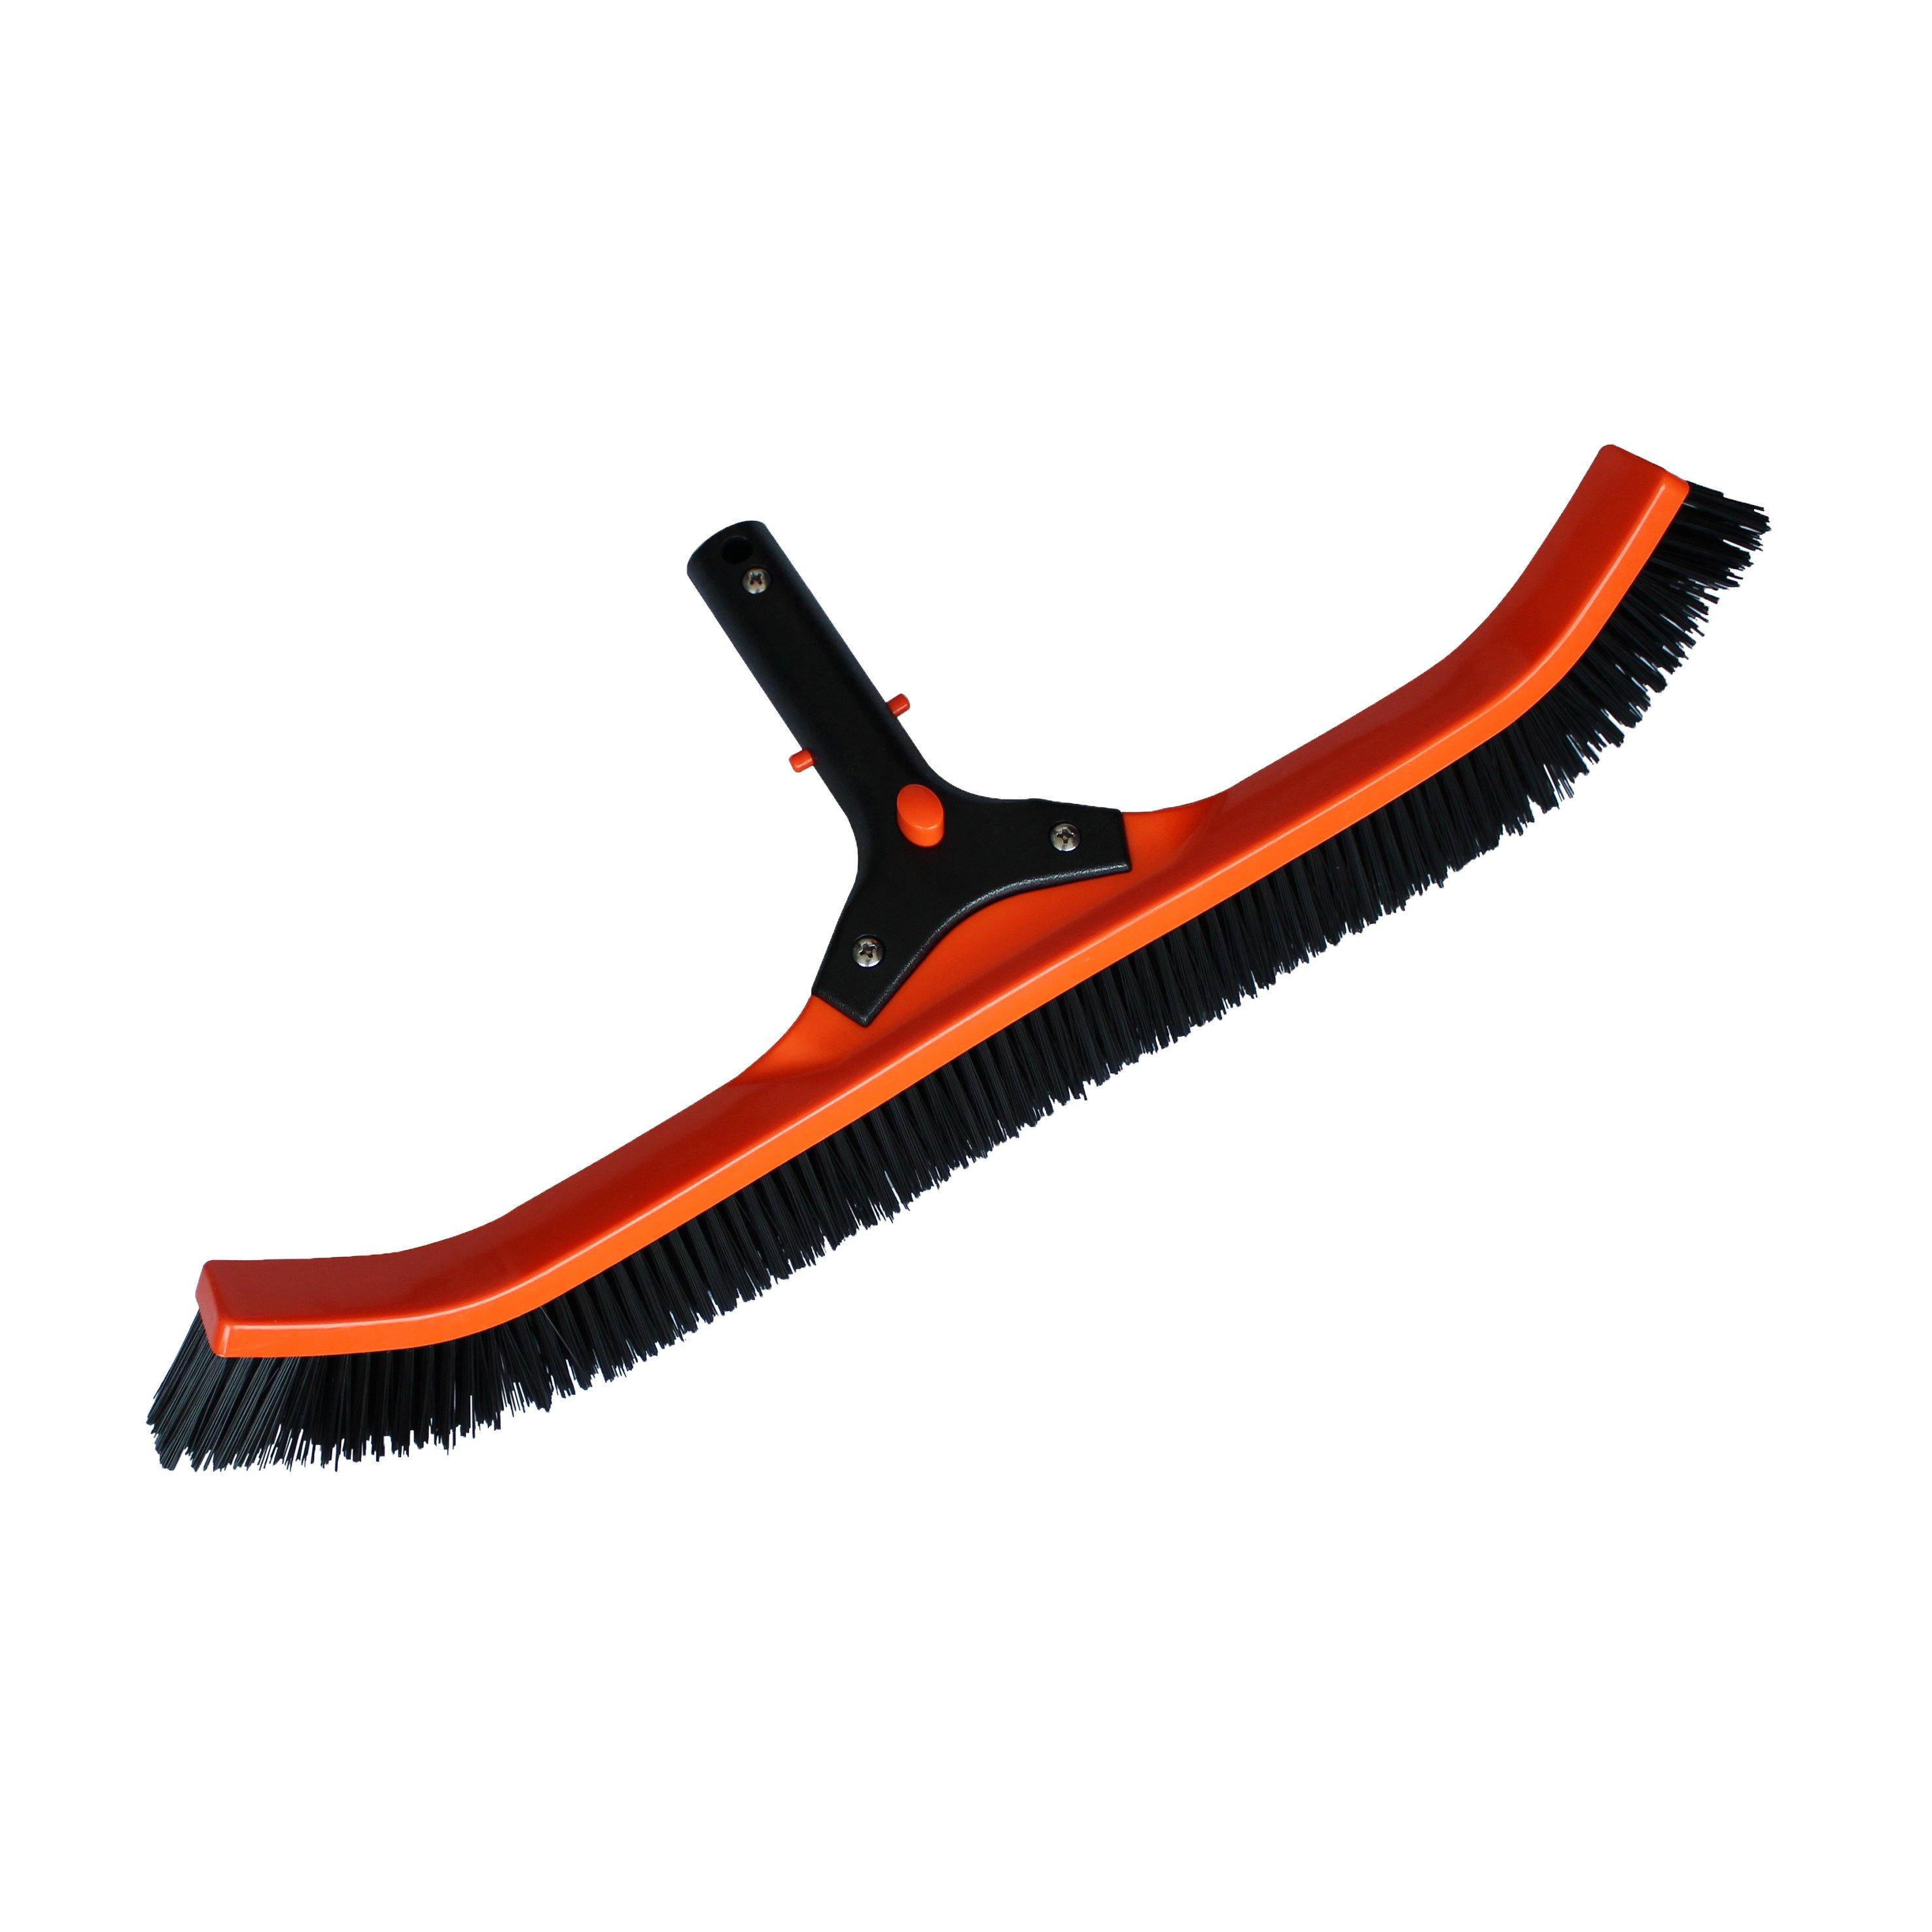 Moore Wilson's - Receive a FREE Cast Iron Scrub Brush with your